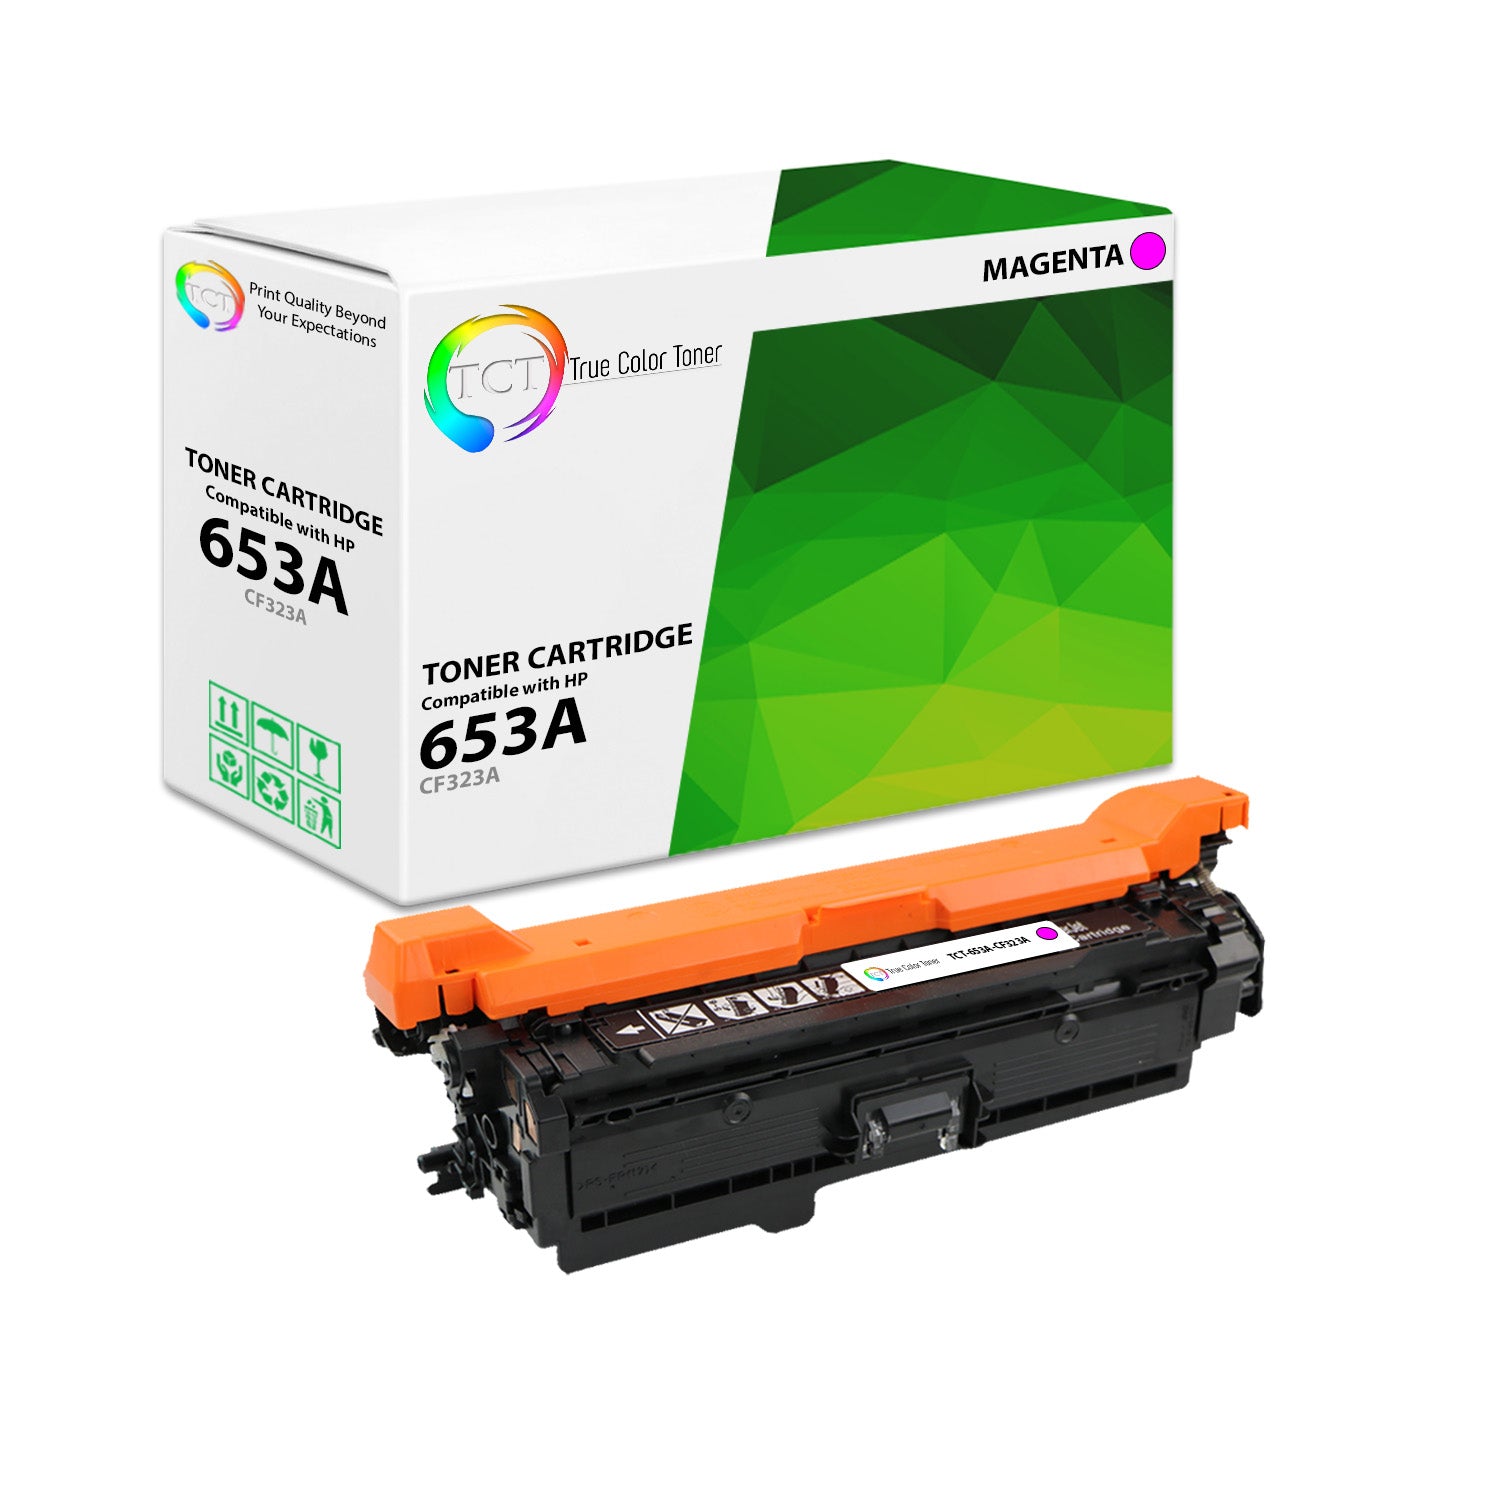 TCT Compatible Toner Cartridge Replacement for the HP 653A Series - 1 Pack Magenta